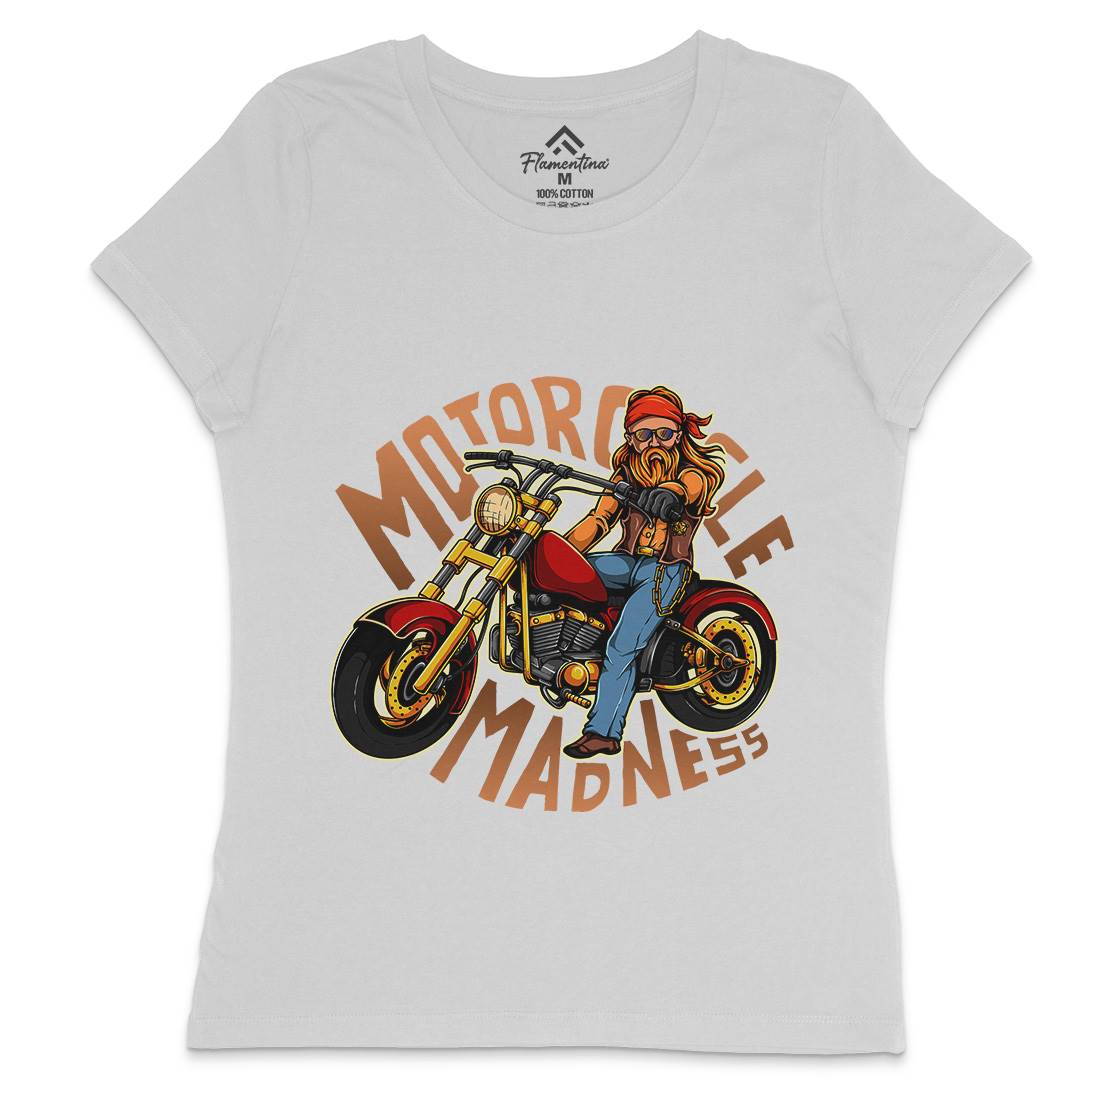 Madness Womens Crew Neck T-Shirt Motorcycles A438